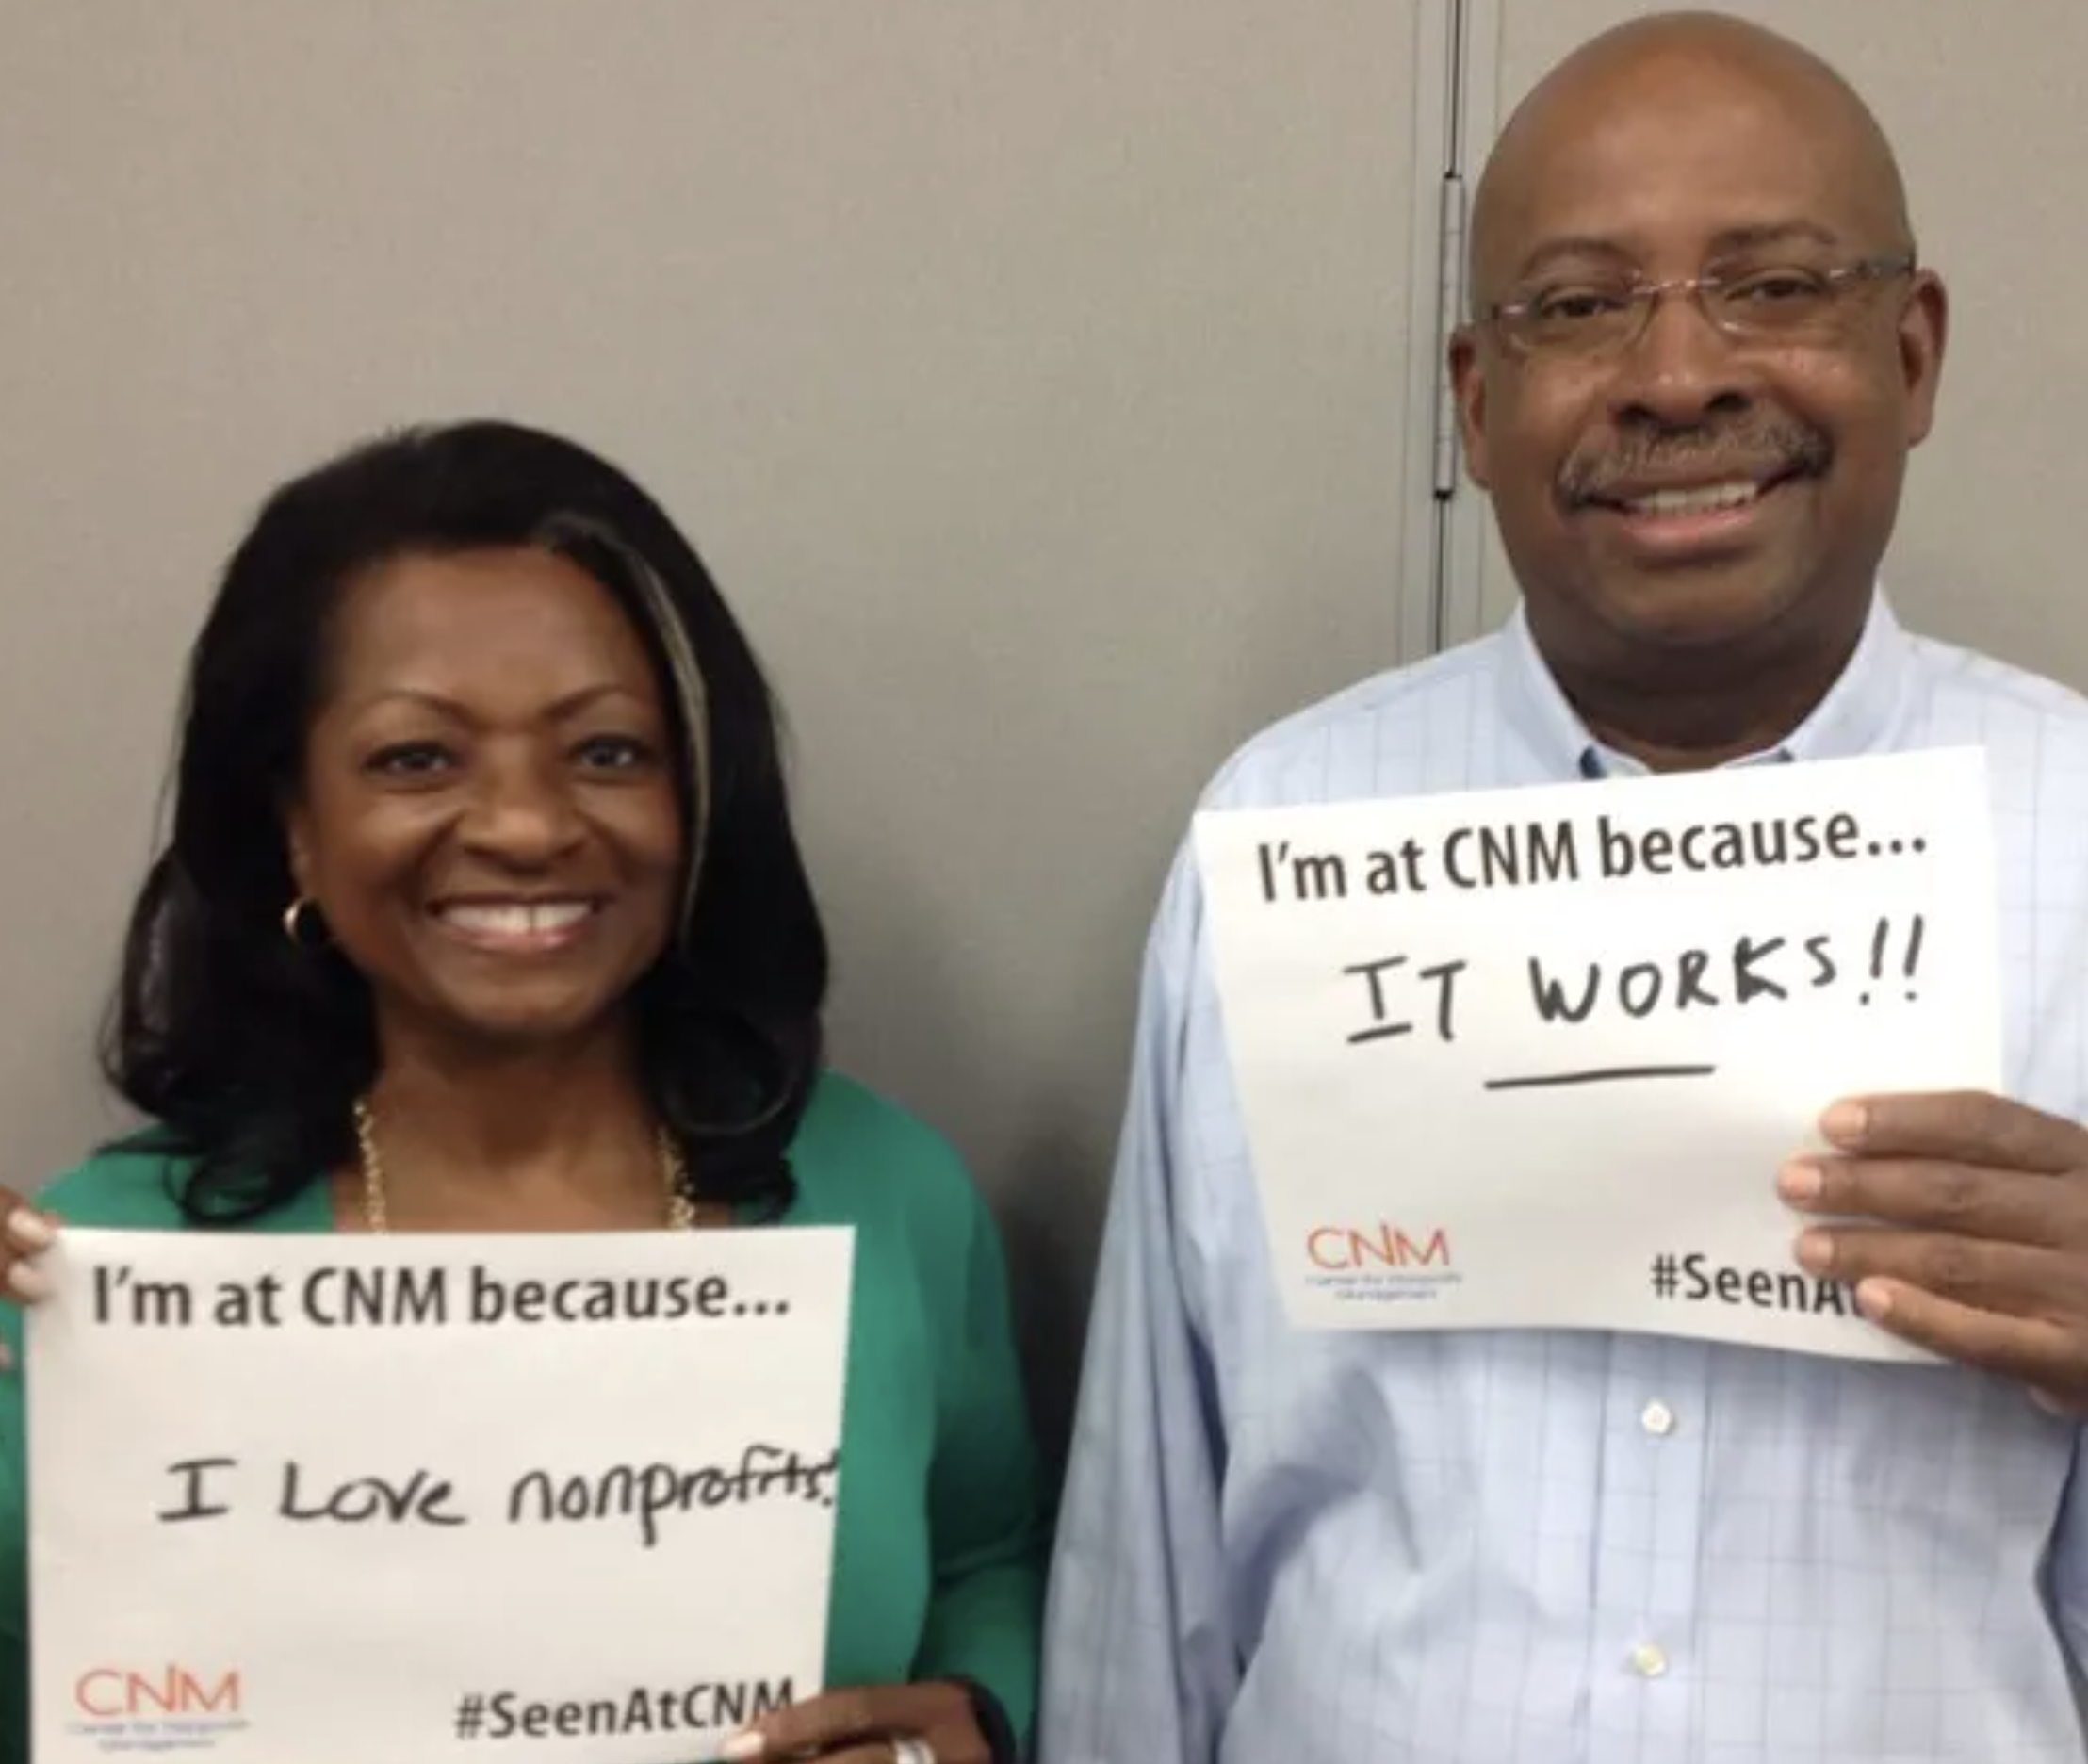 2 nonprofit employees posing holding the sings " I am at CNM because I love nonprofit" and "I am at CNM because it works"